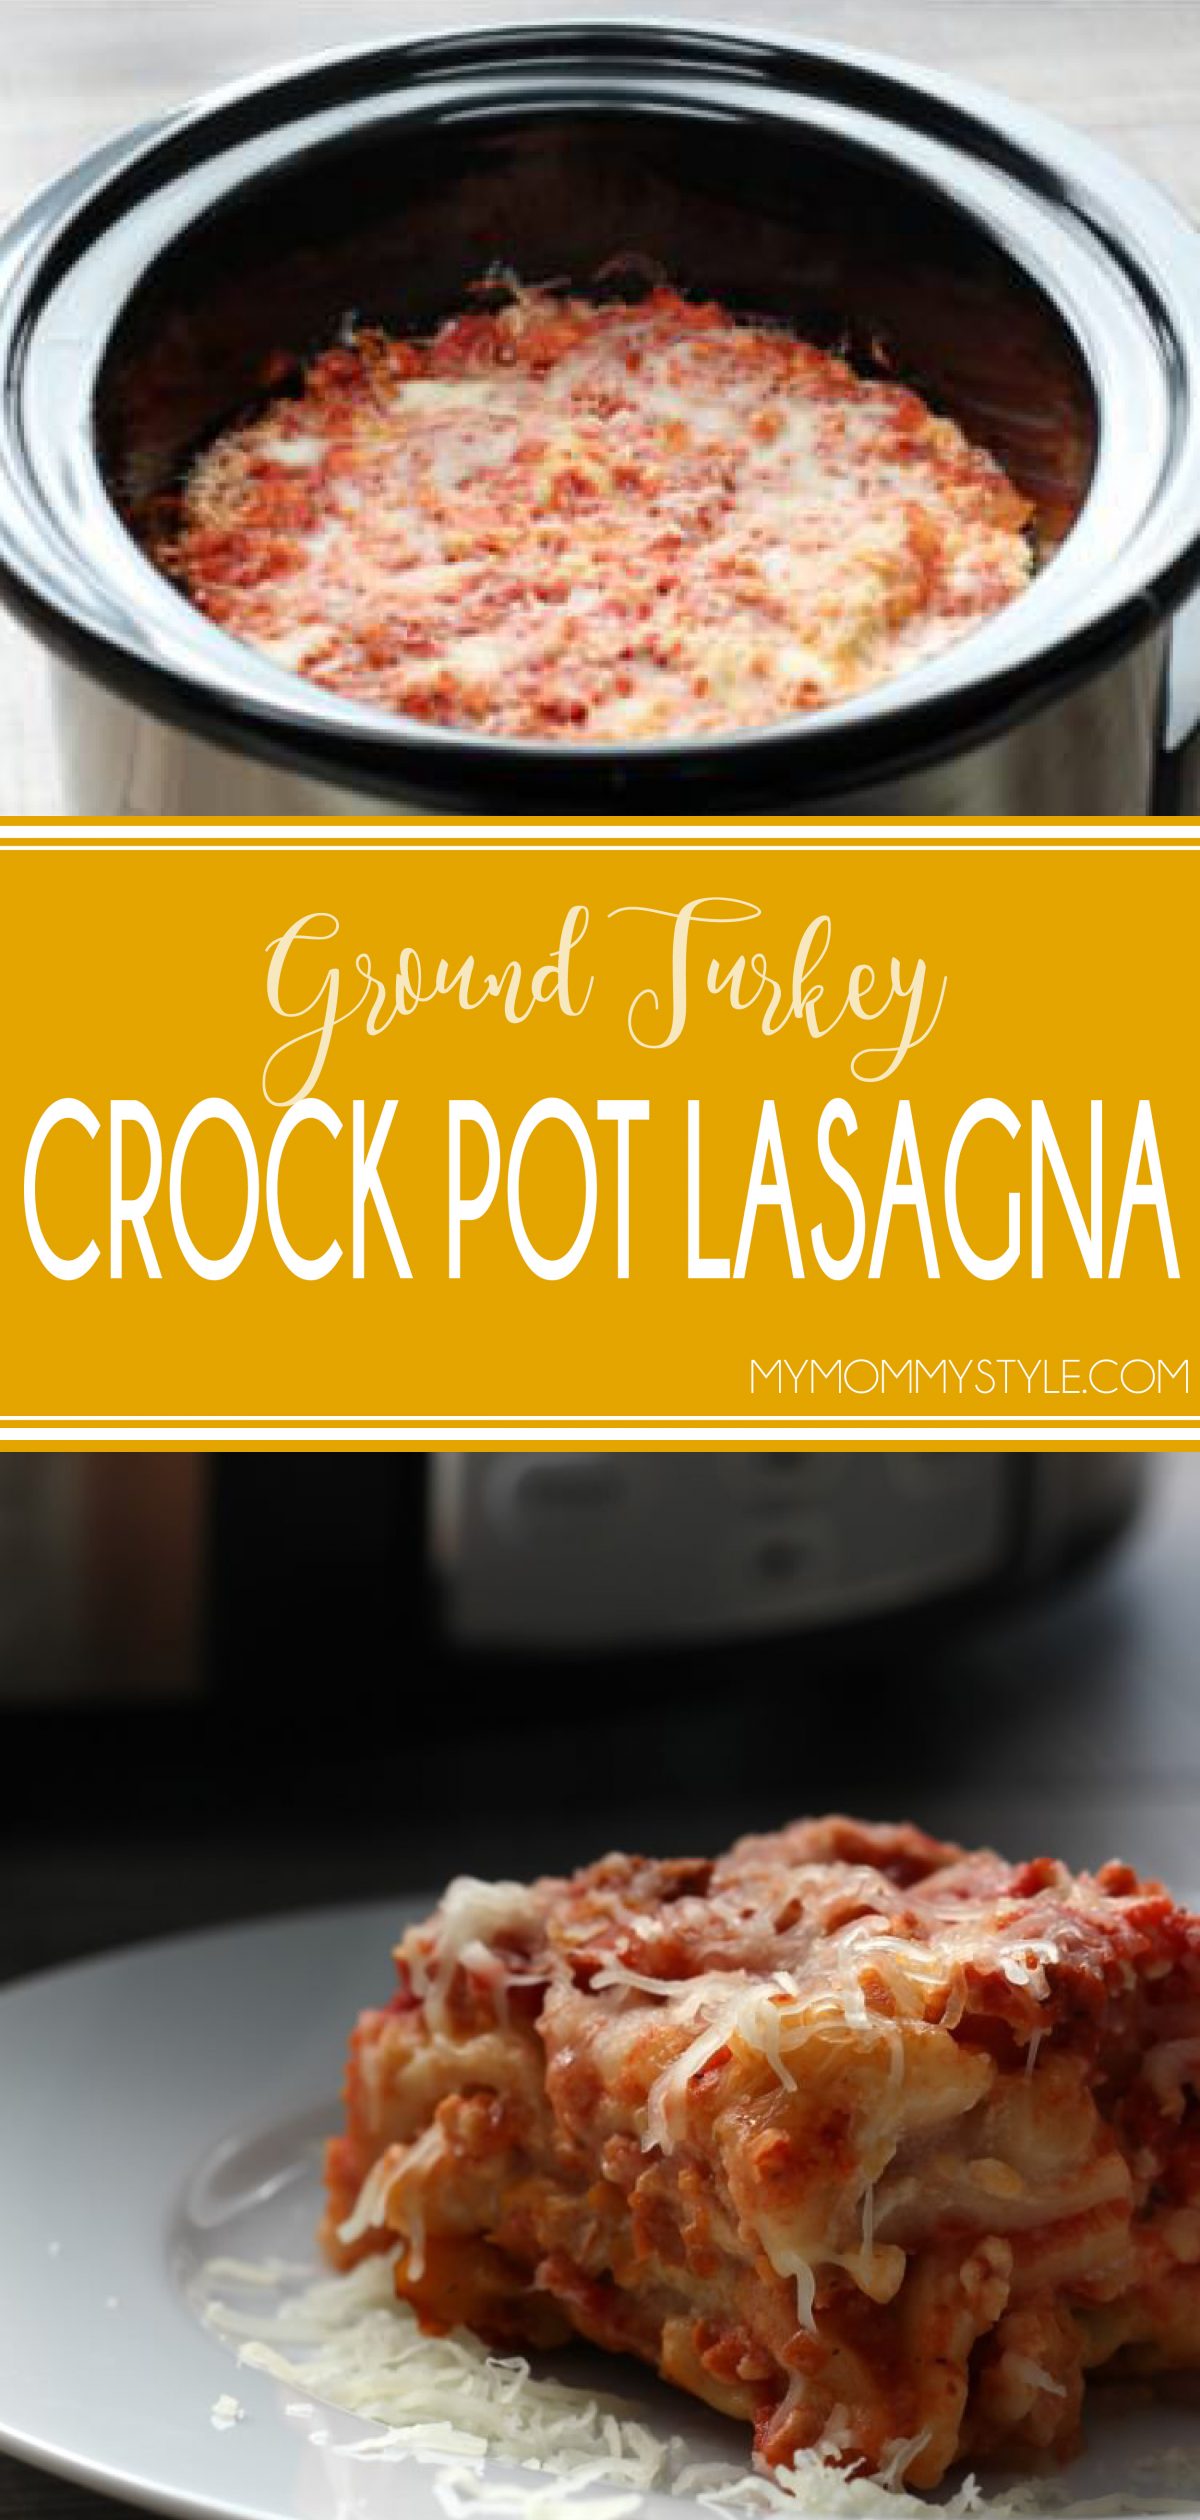 This Crock Pot lasagna is so easy.  No boiling lasagna noodles (that's the worst part of lasagna prep in my opinion)!  Throw all the ingredients into the Crock Pot and 4 hours later you have a flavorful lasagna! via @mymommystyle